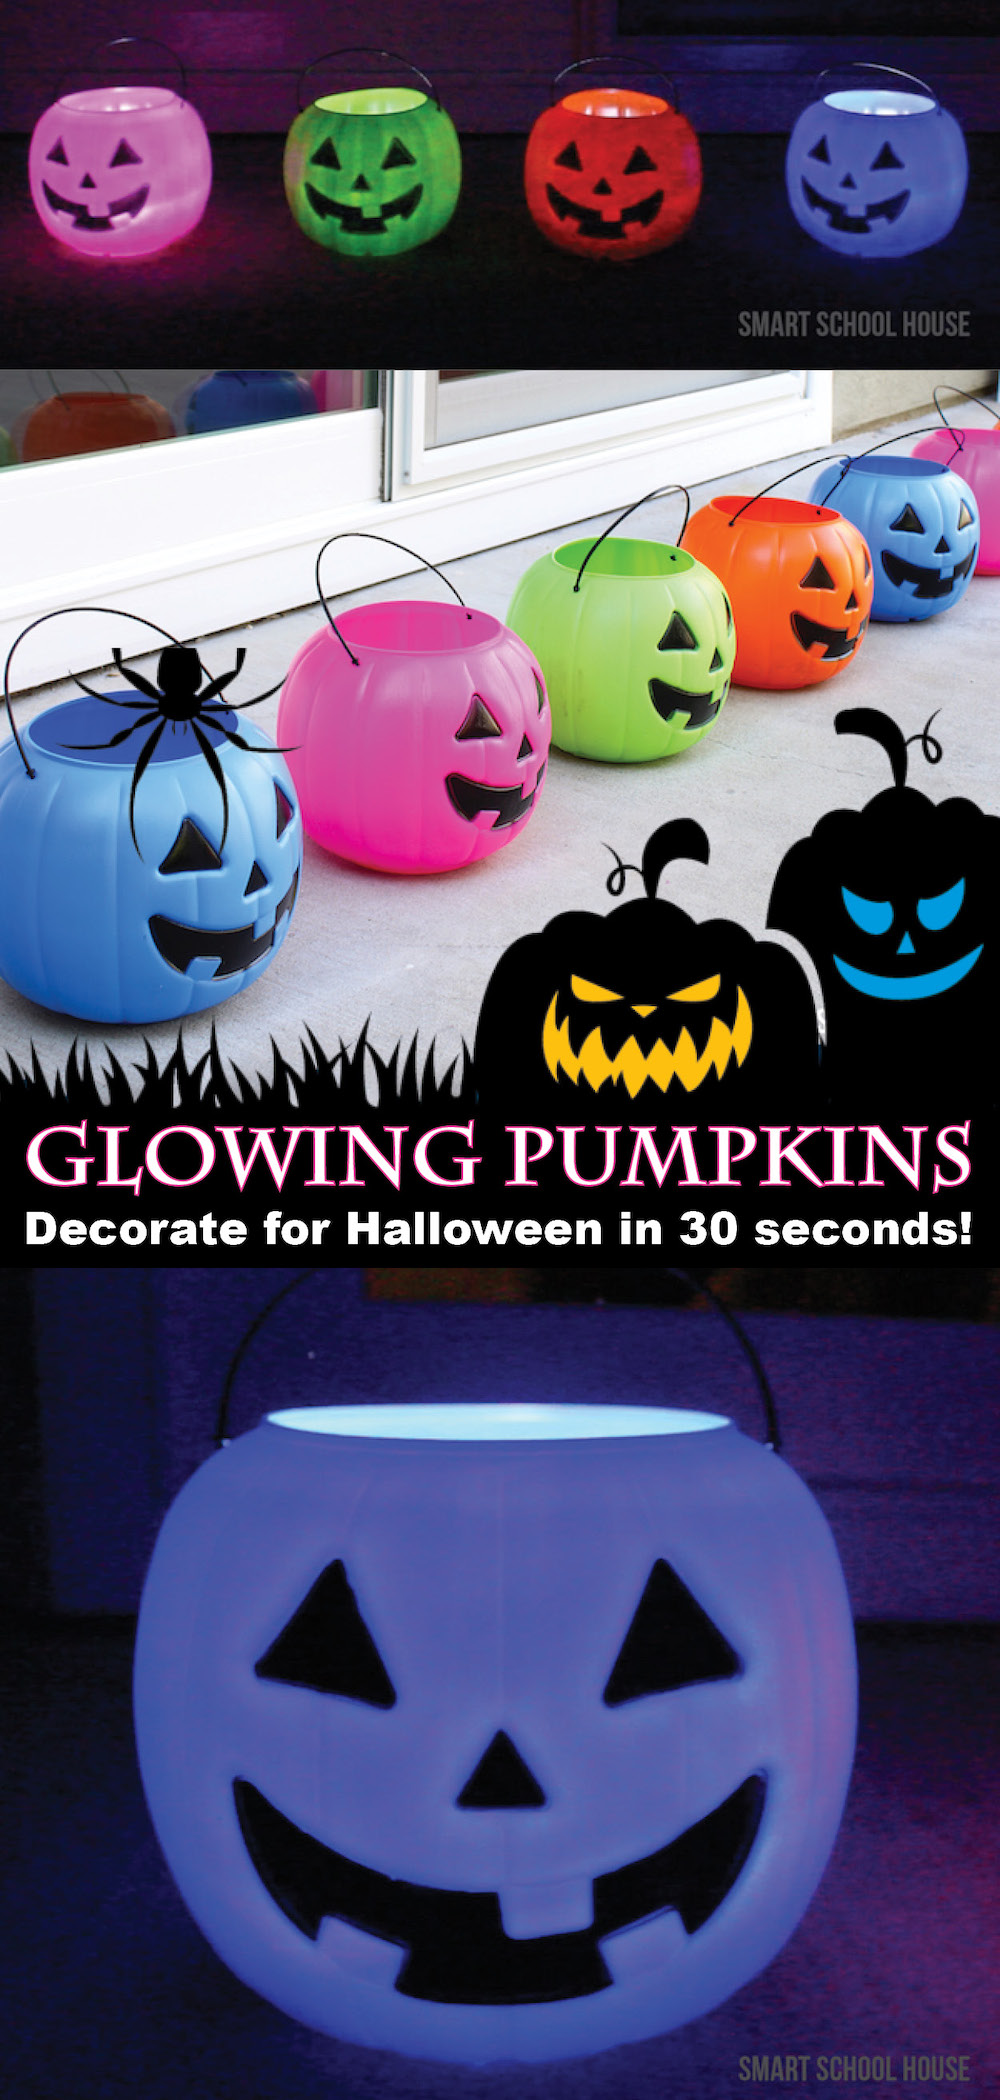 Glowing Pumpkin Pails - Decorate for Halloween in 30 seconds by setting out these glowing pumpkin pails! I got the colorful pumpkins for one dollar. They are SO ADORABLE! 